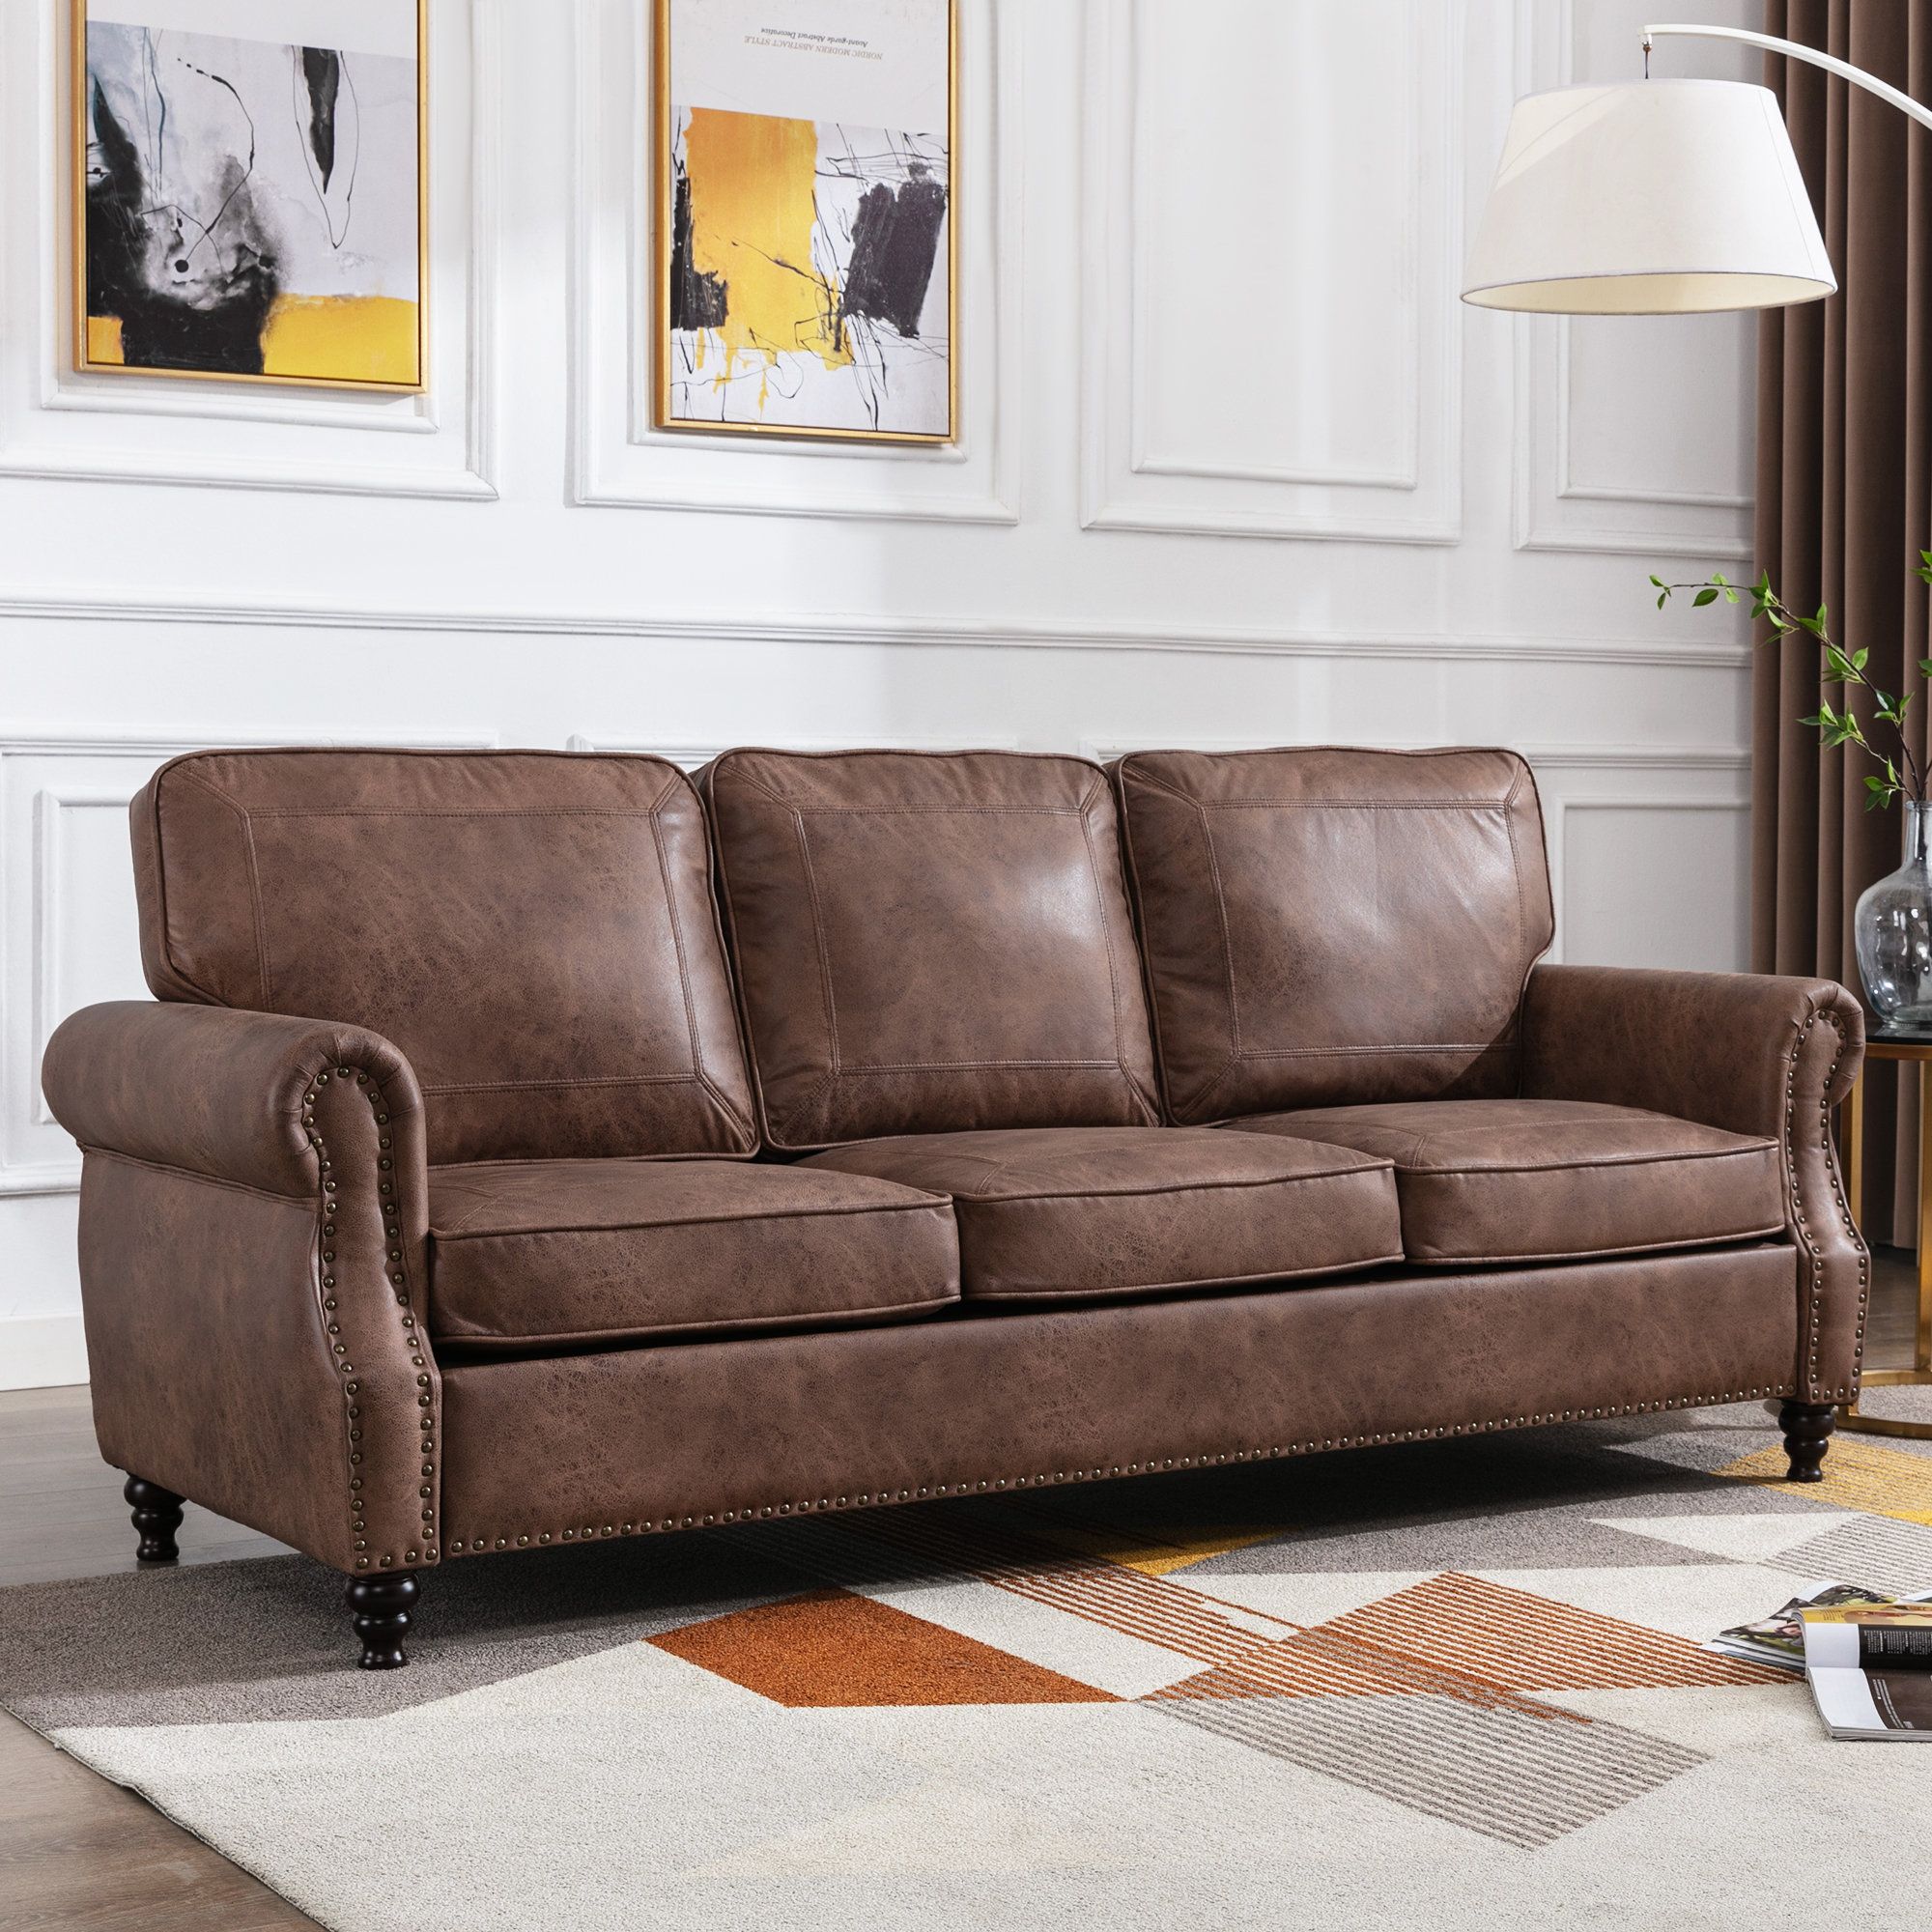 Lark Manor Amarius 80" Wide Faux Leather Rolled Arm Sofa & Reviews | Wayfair For Faux Leather Sofas (View 8 of 15)